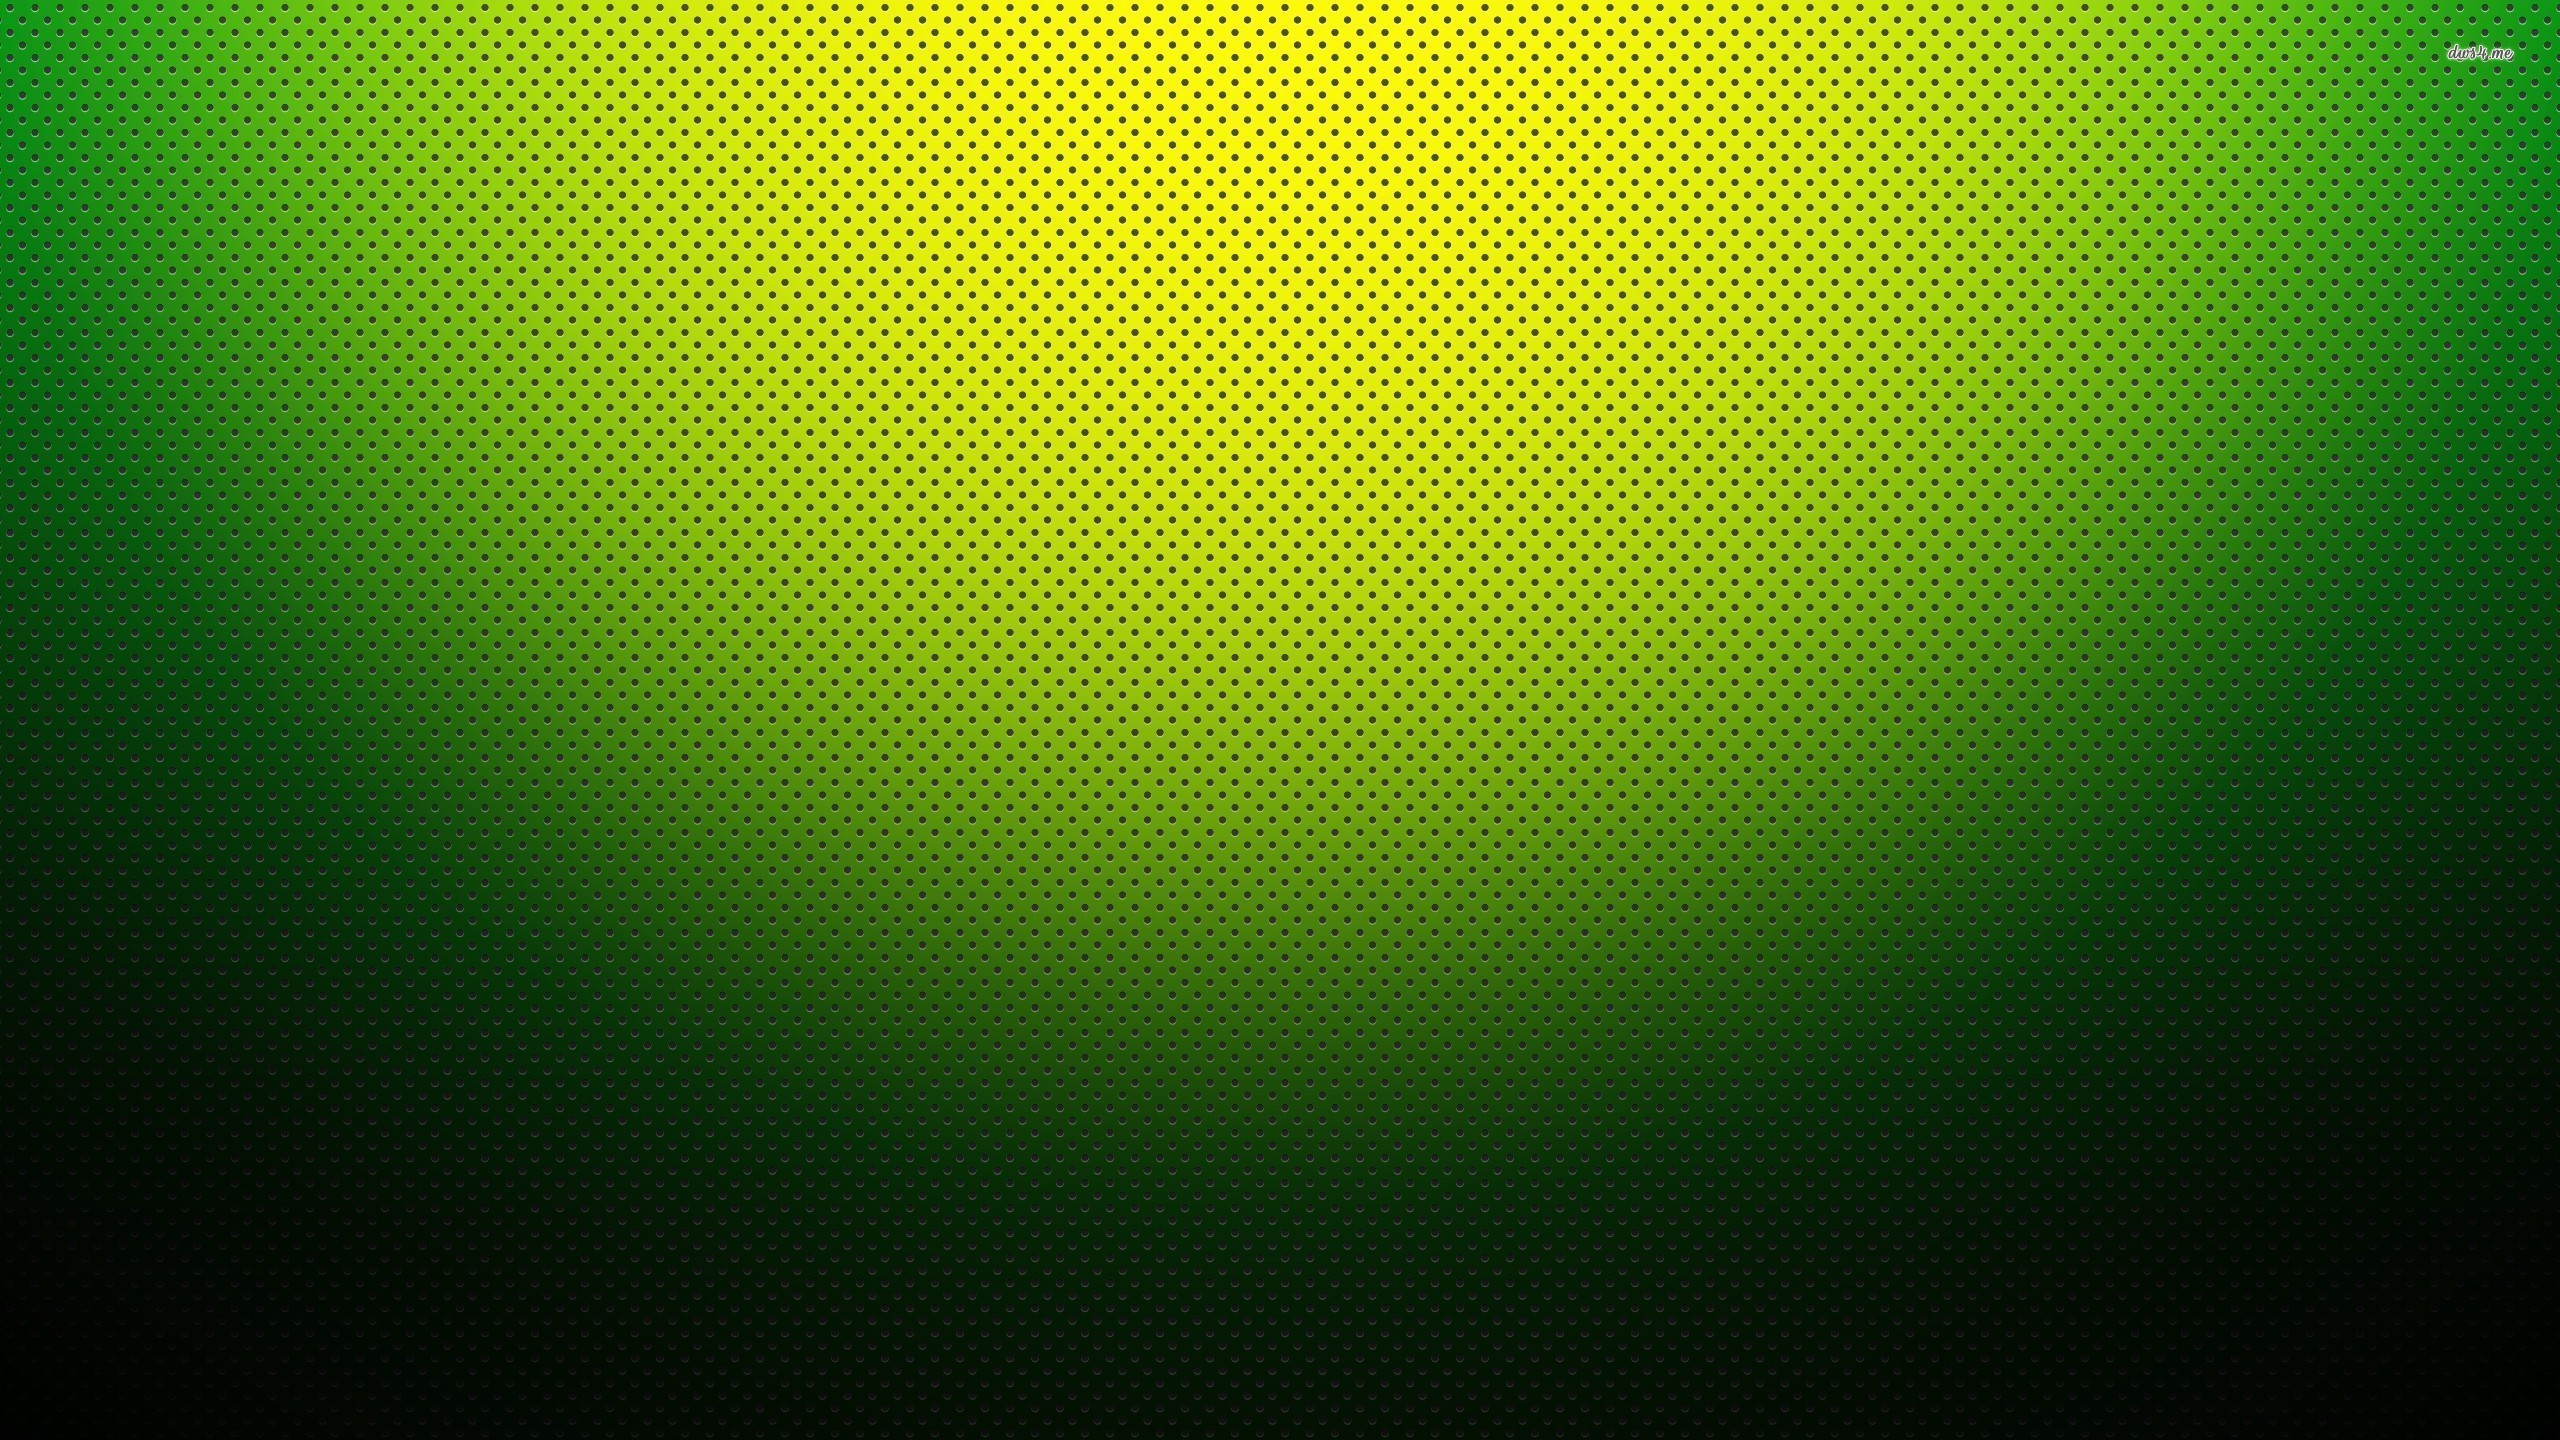 2560x1440 Green perforated metal pattern wallpaper - Abstract .